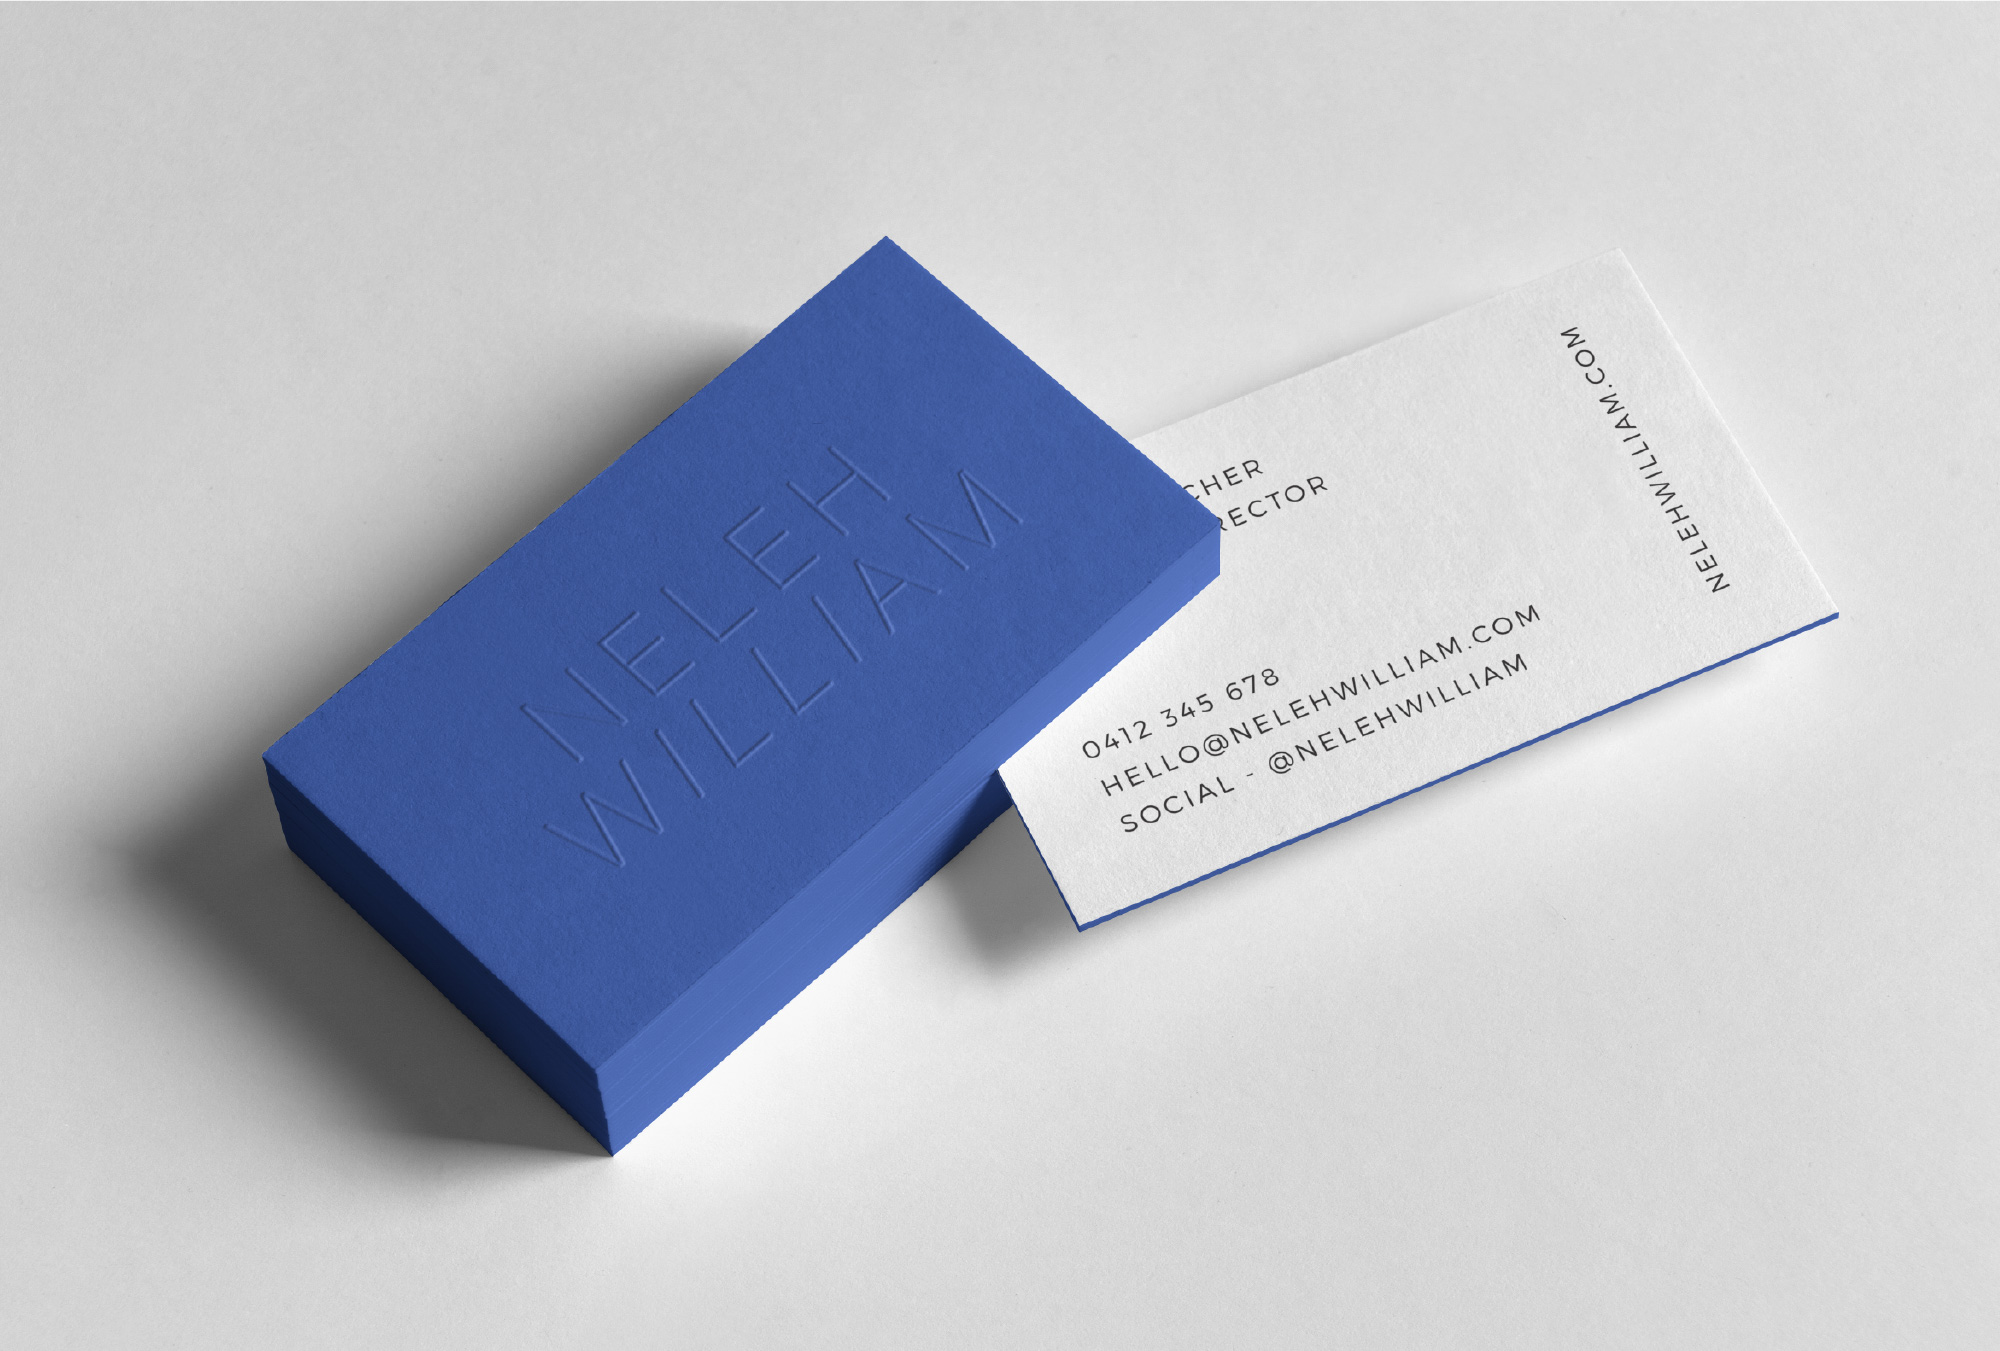 Electric blue embossed business cards for Neleh William